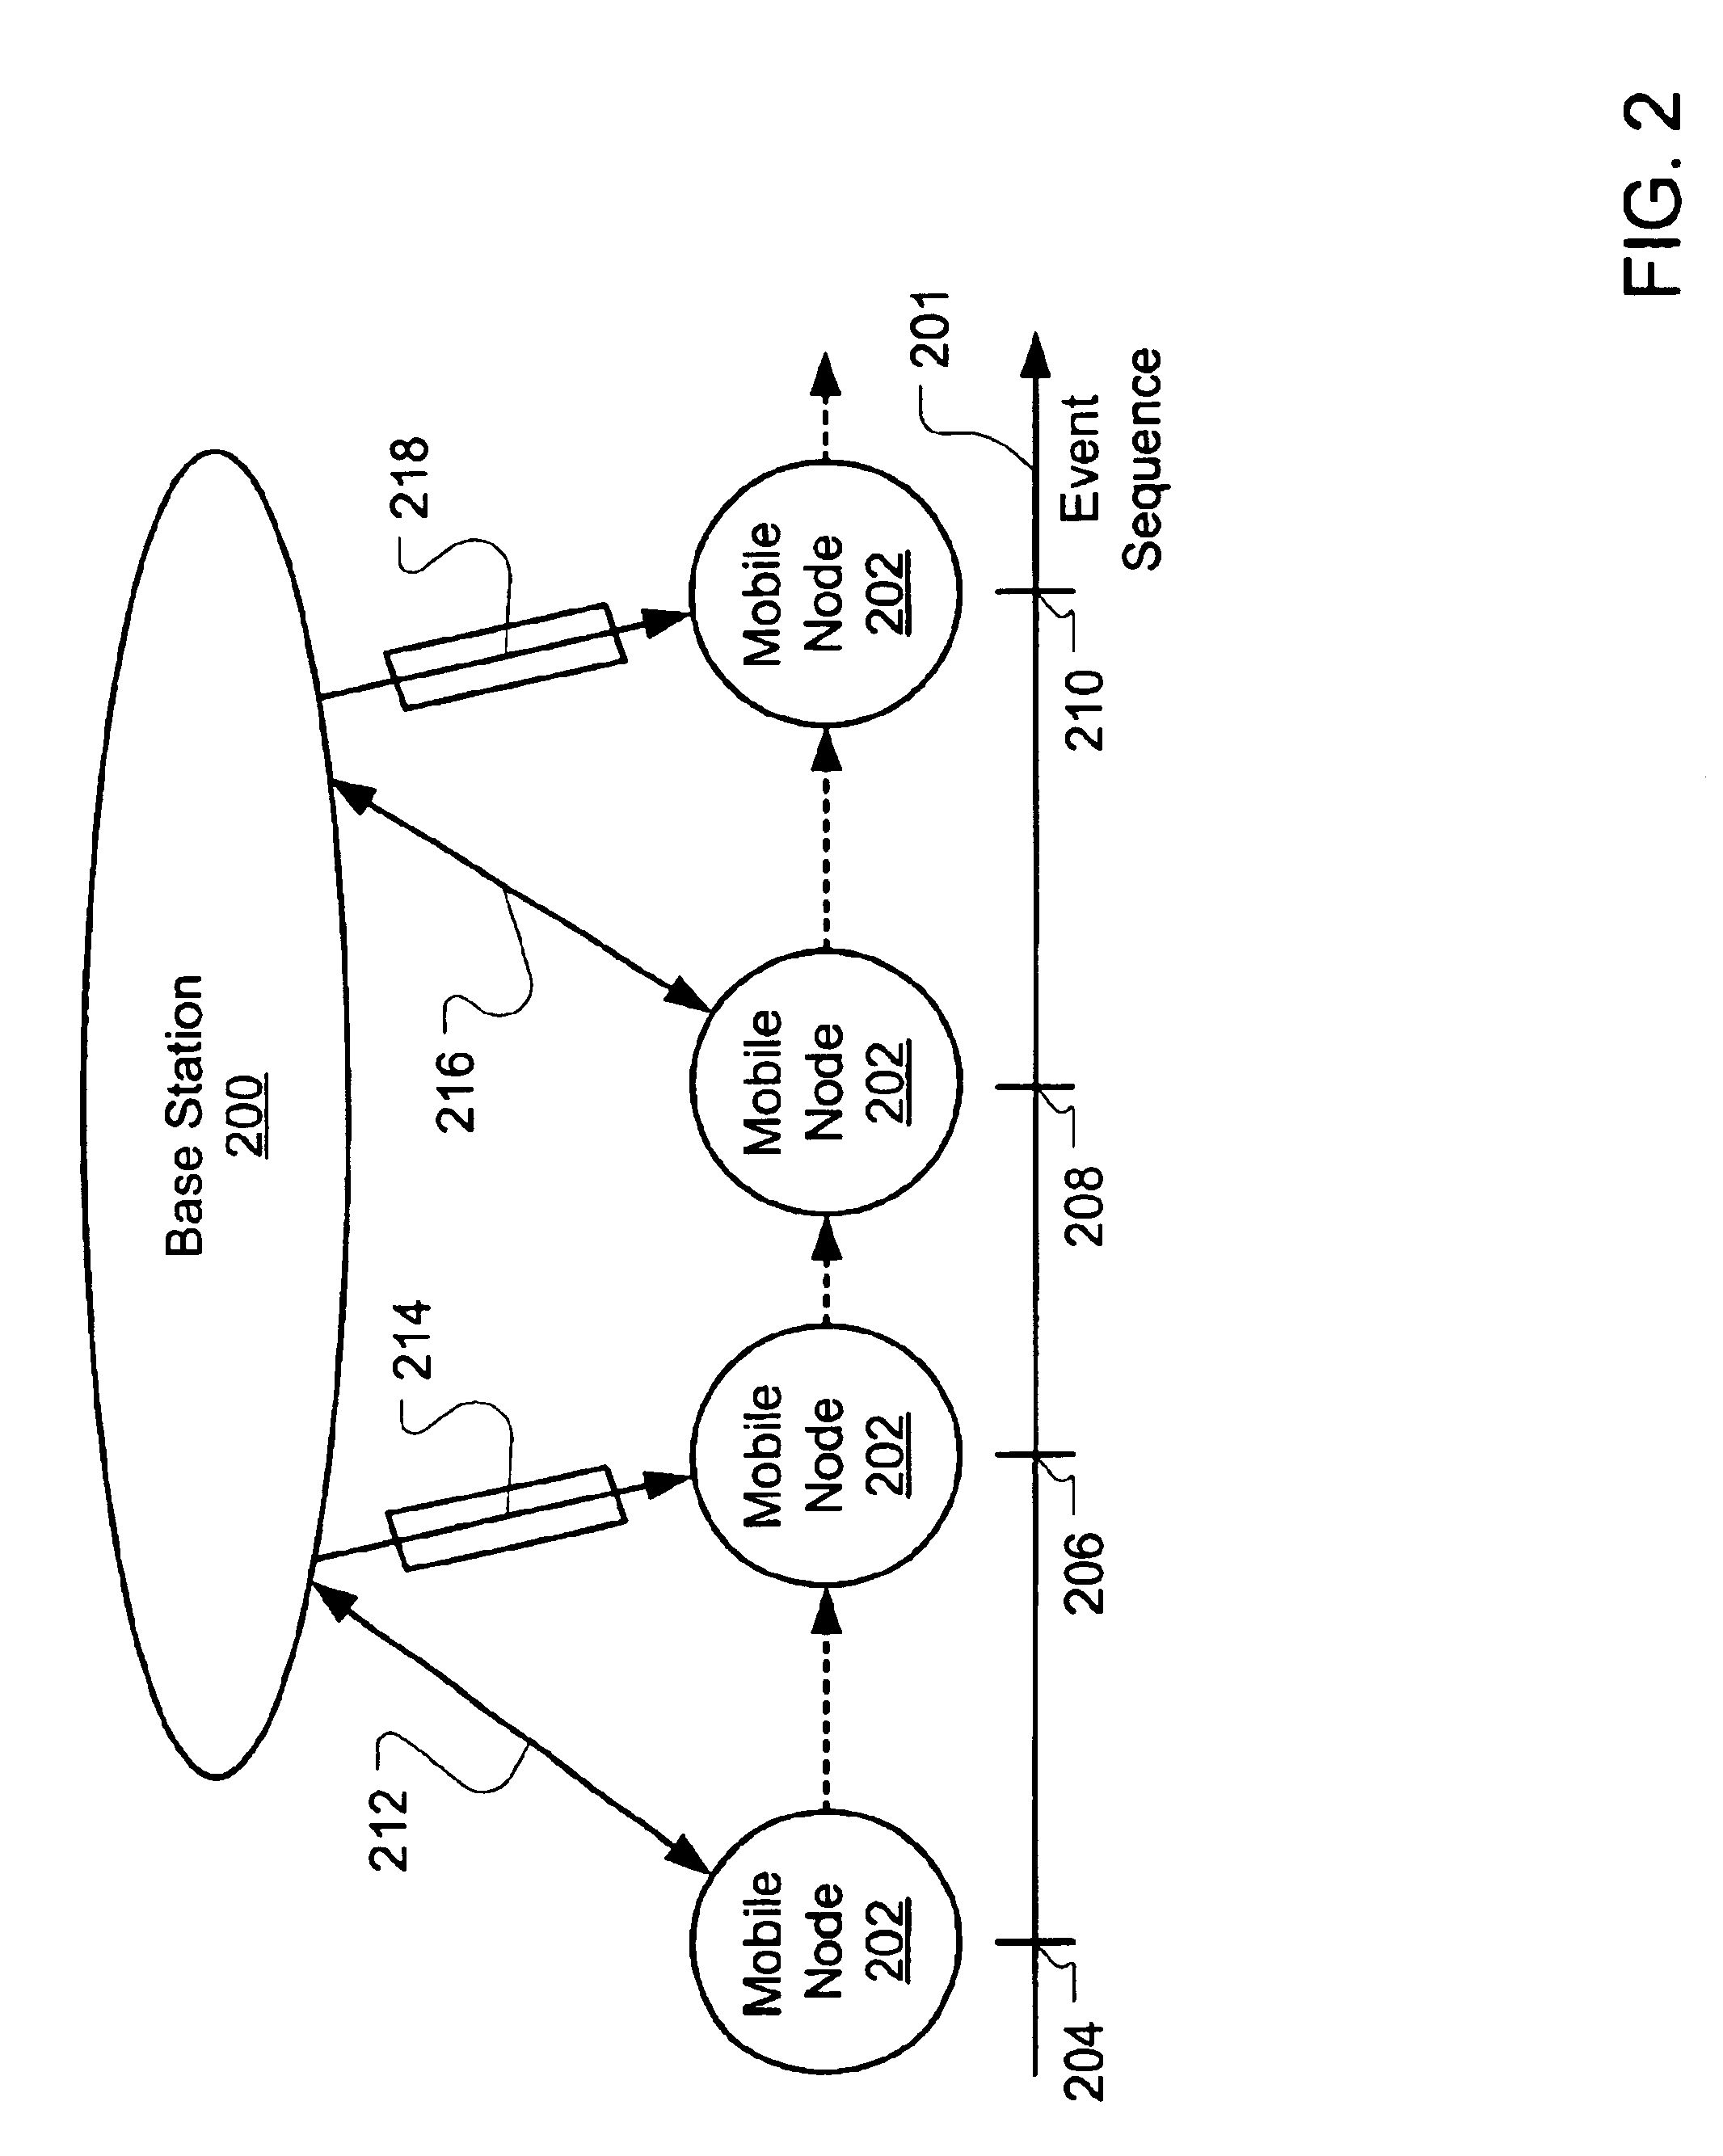 Mobile authentication system with reduced authentication delay